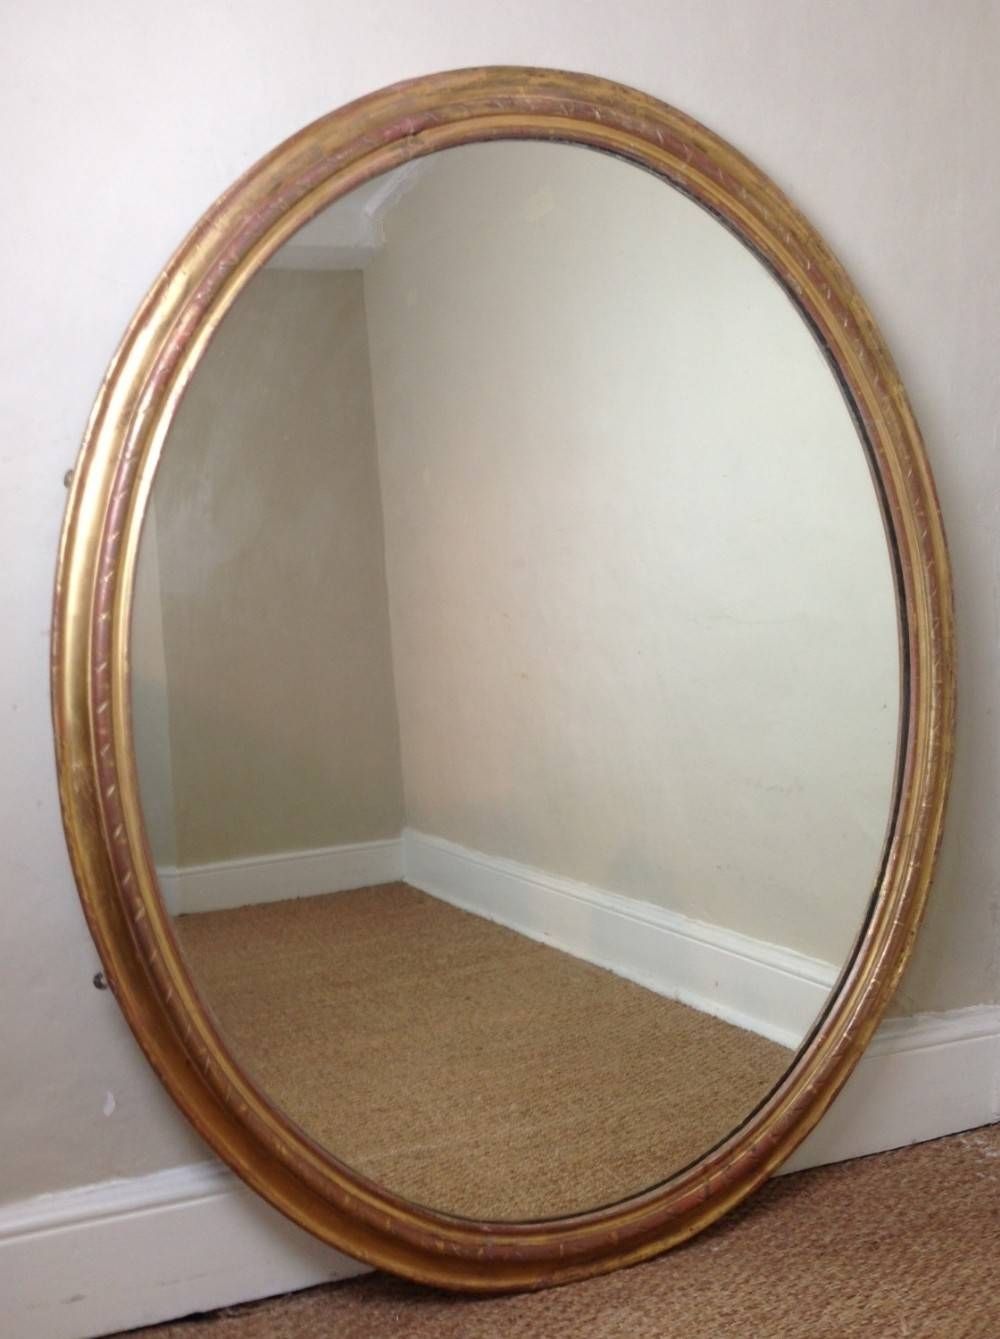 A Large English Gilt Oval Mirror C 1860 | 279595 | Sellingantiques For Large Oval Mirrors (View 2 of 25)